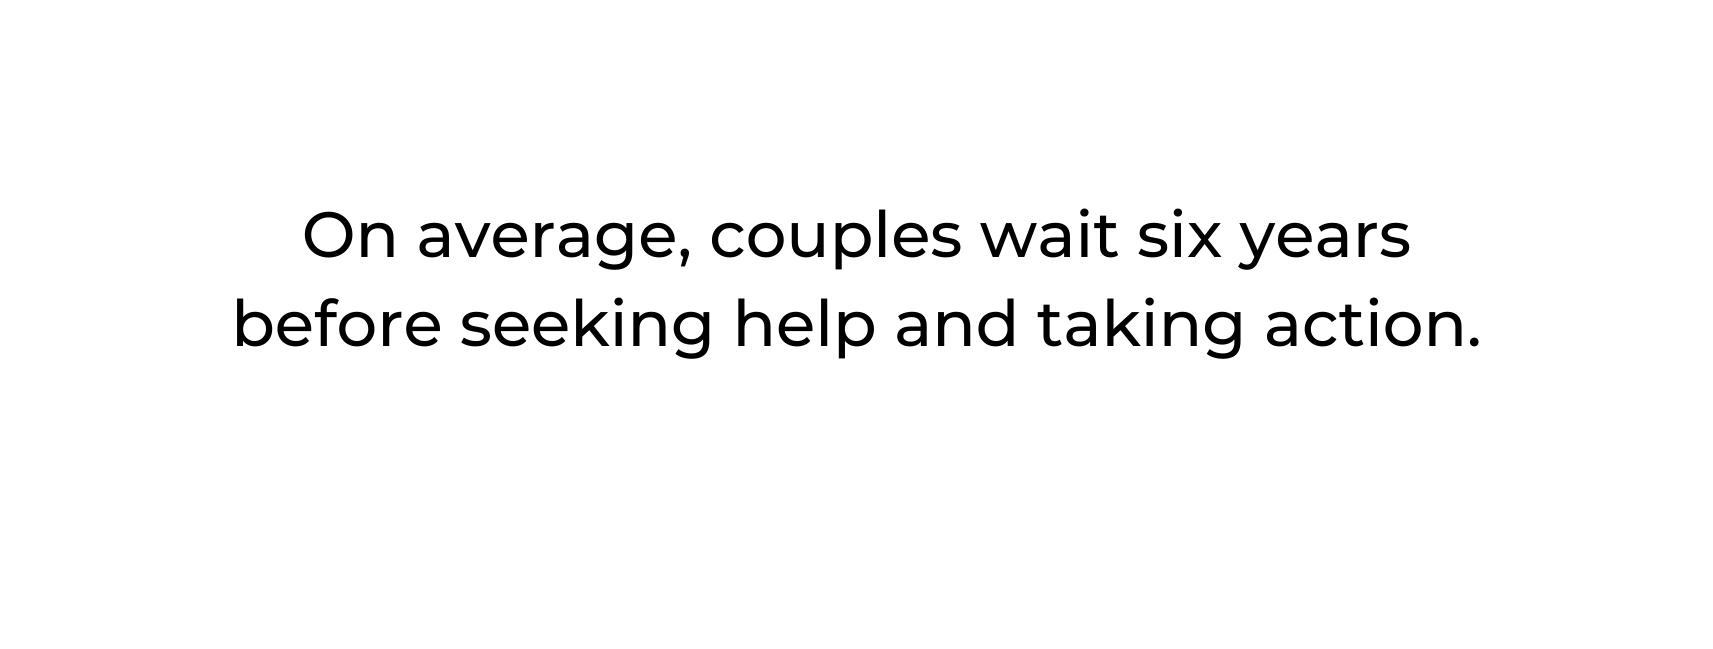 On average couples wait six years before seeking help and taking action